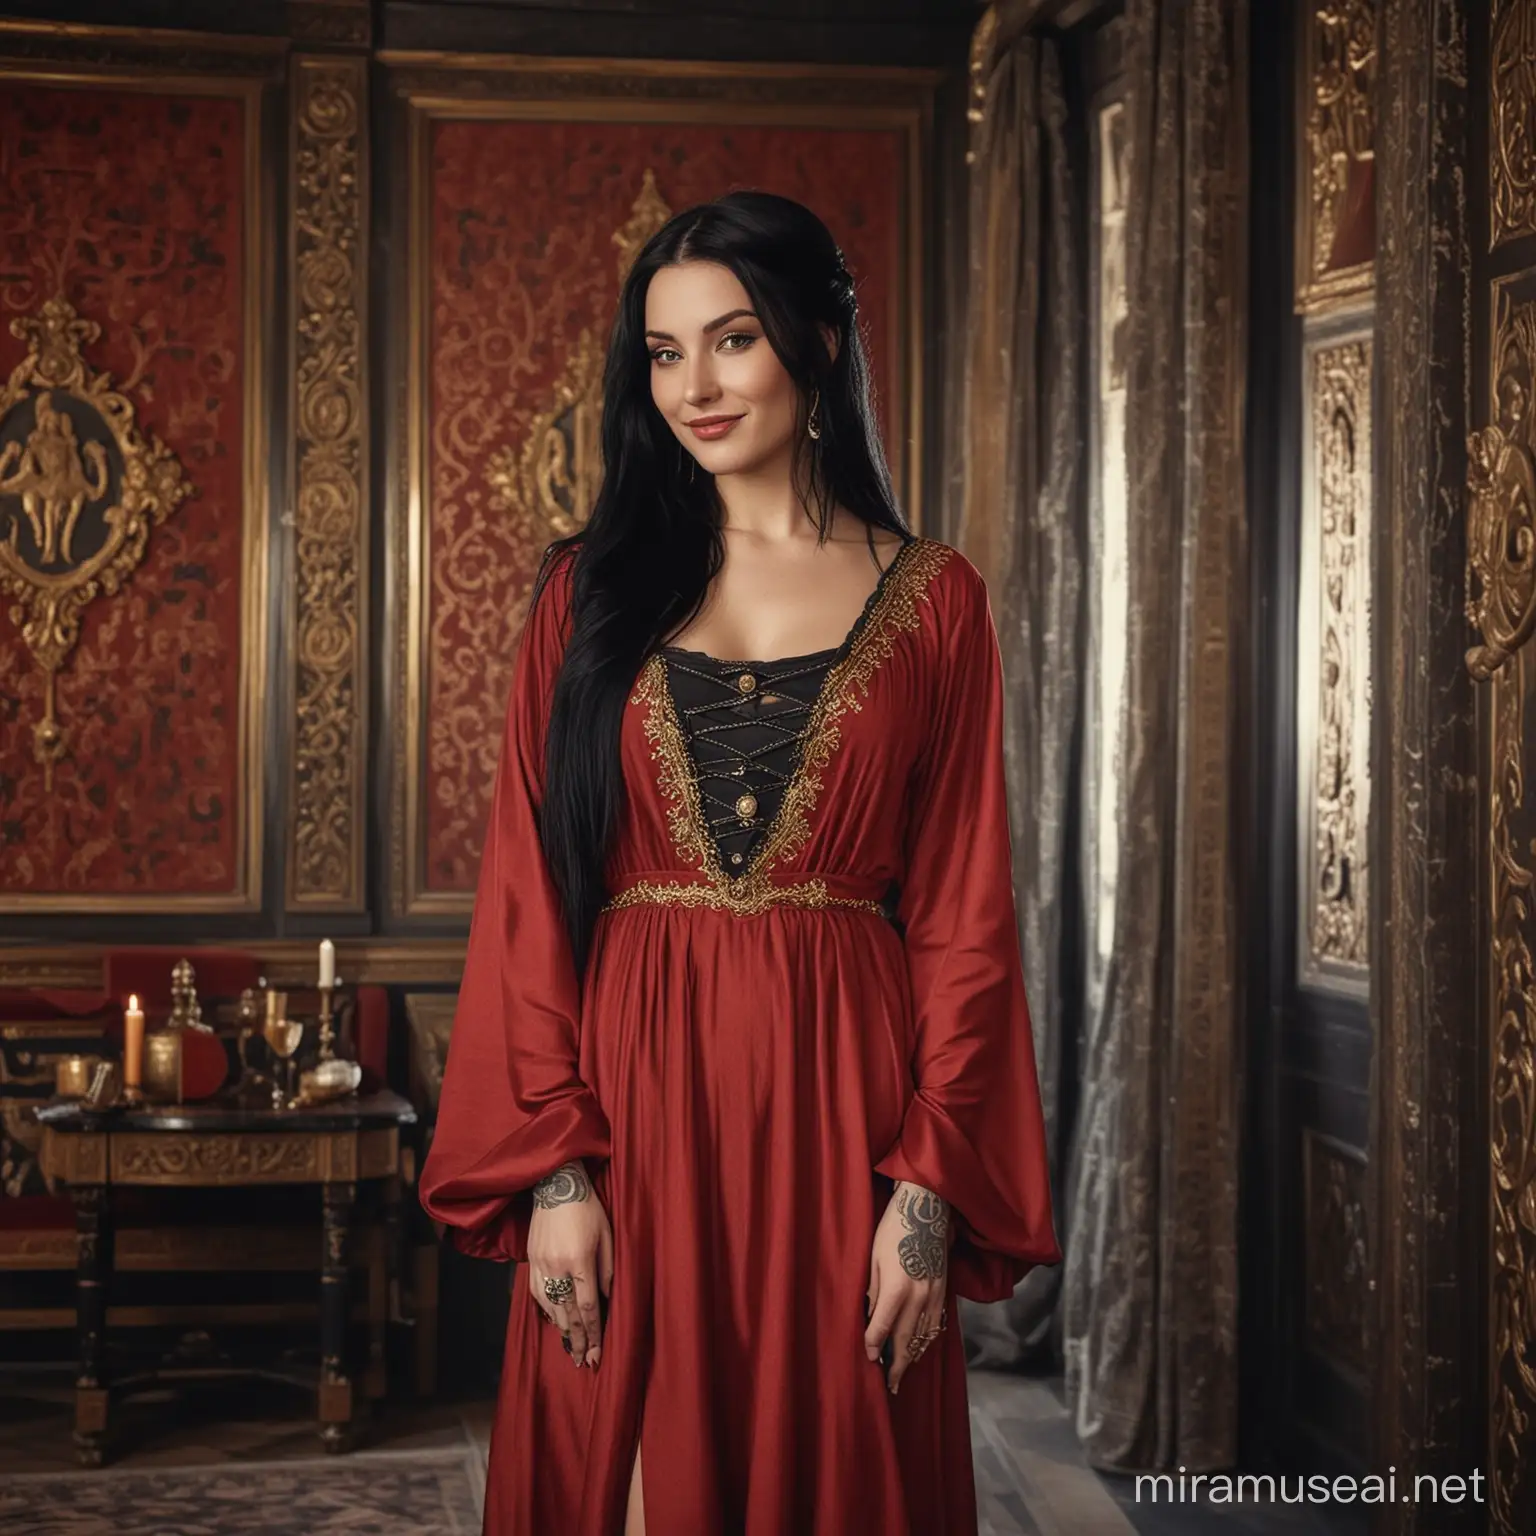 Medieval Noble Woman in Roman Styled Room Smiling